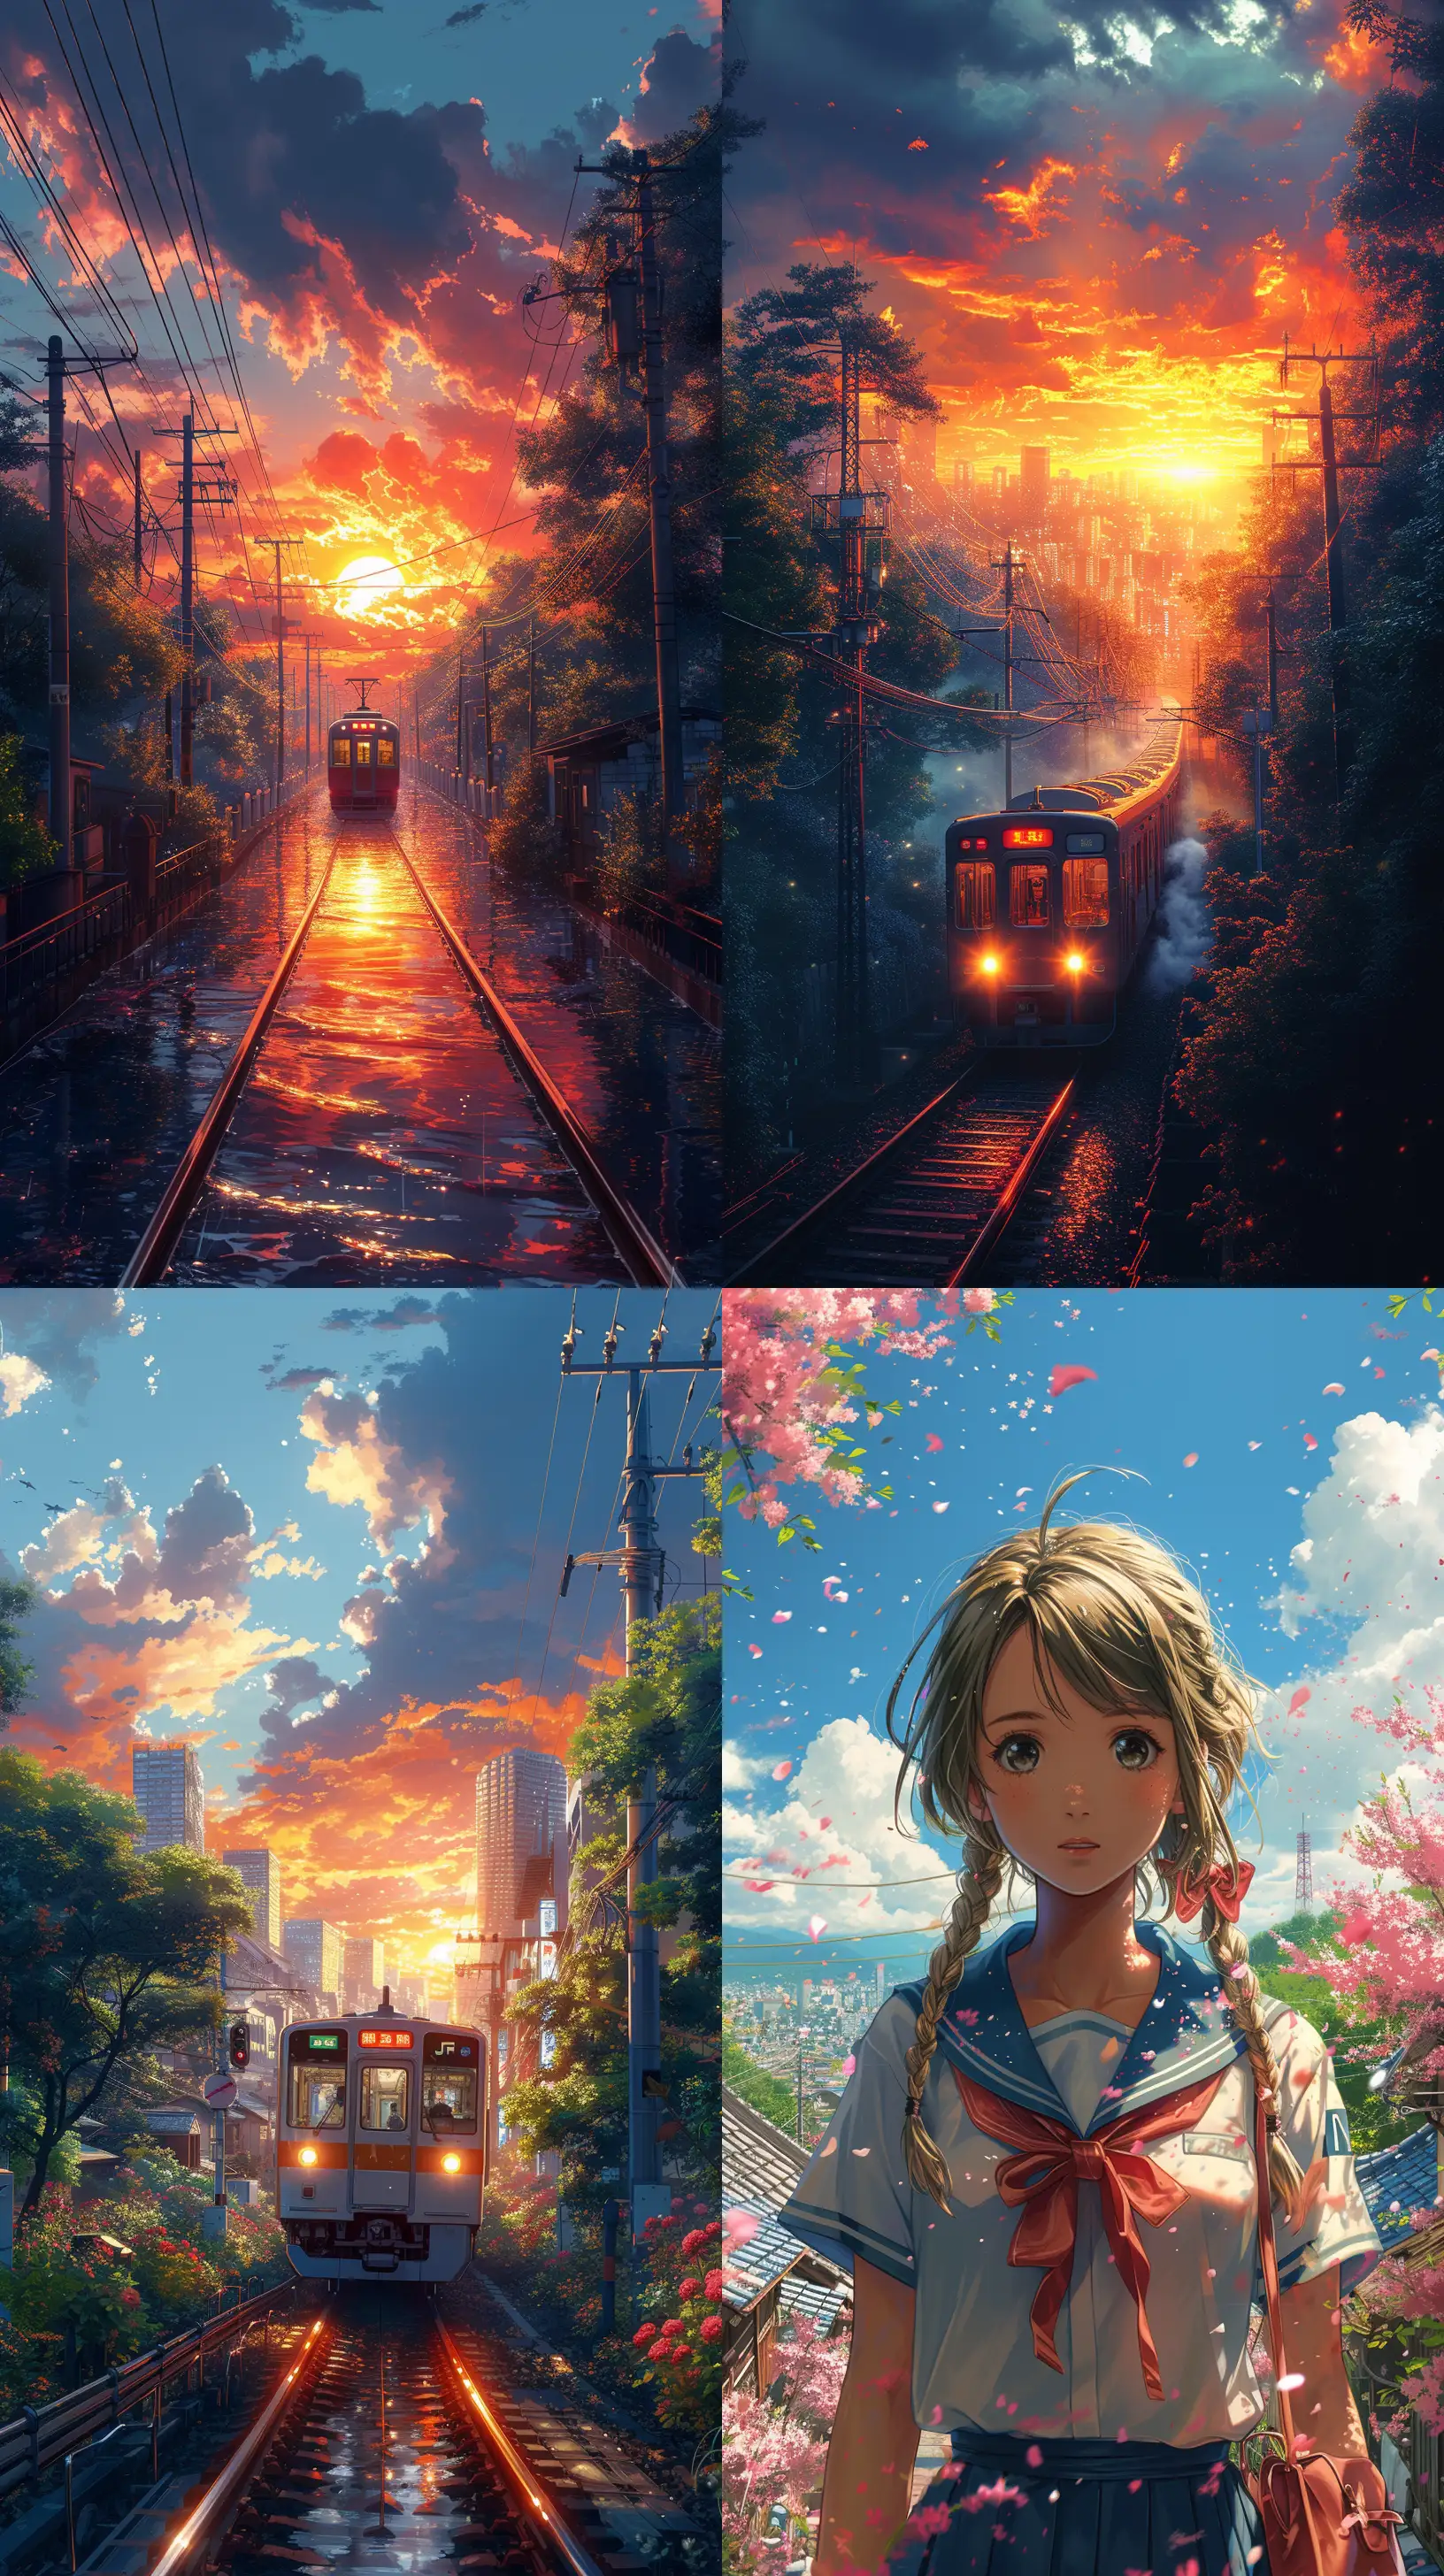 Anime-Training-in-Jakarta-Crossing-Tracks-in-Sky-with-Exquisite-Animation